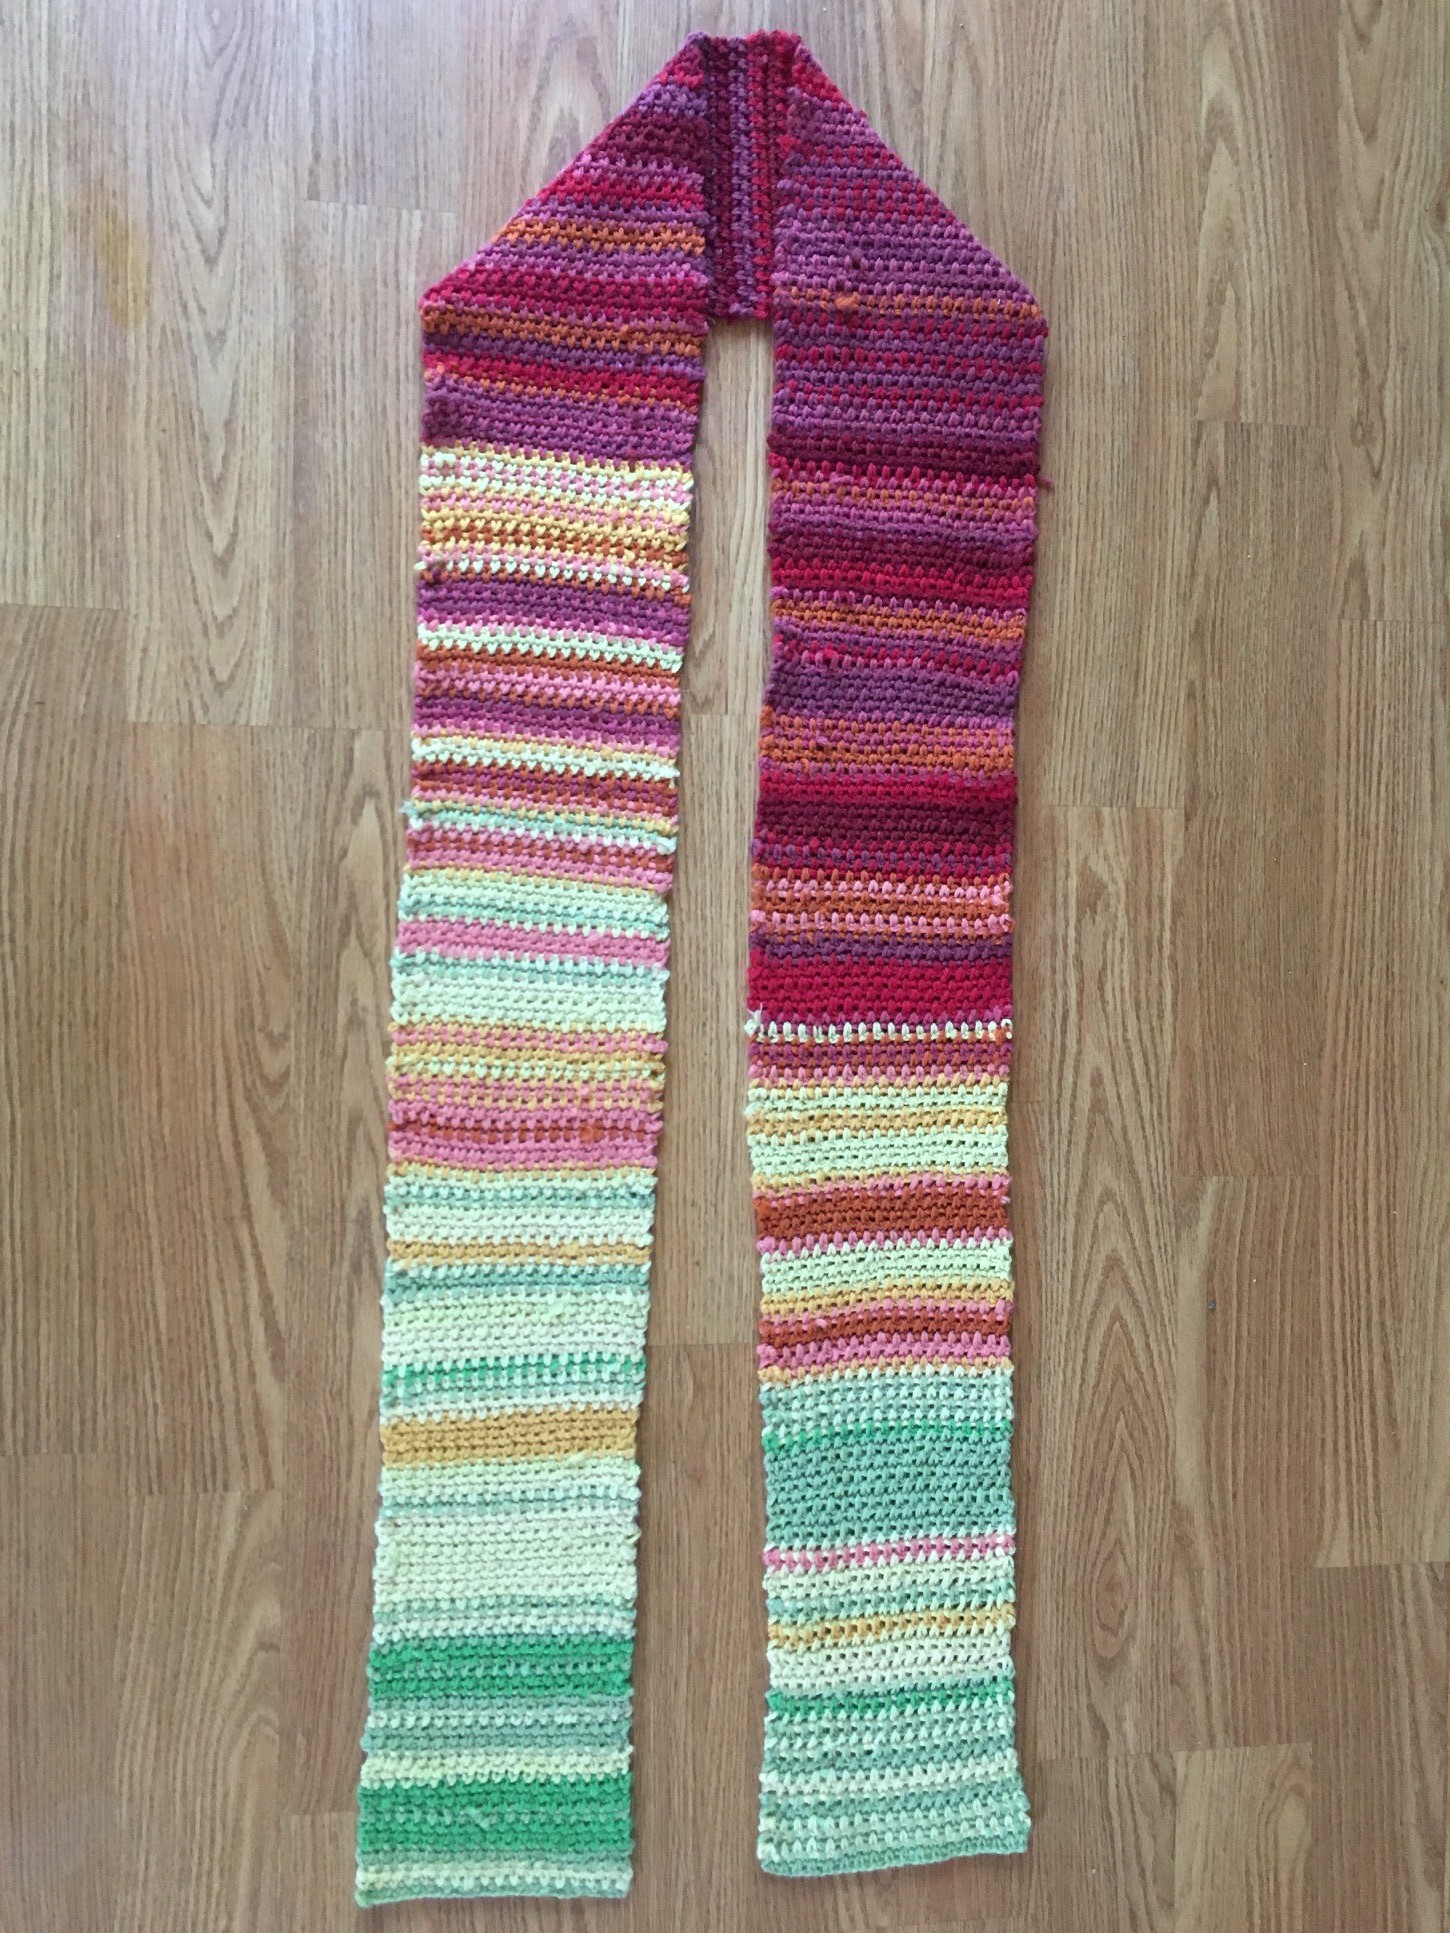 Scarf representing the daily temperatures of Davis